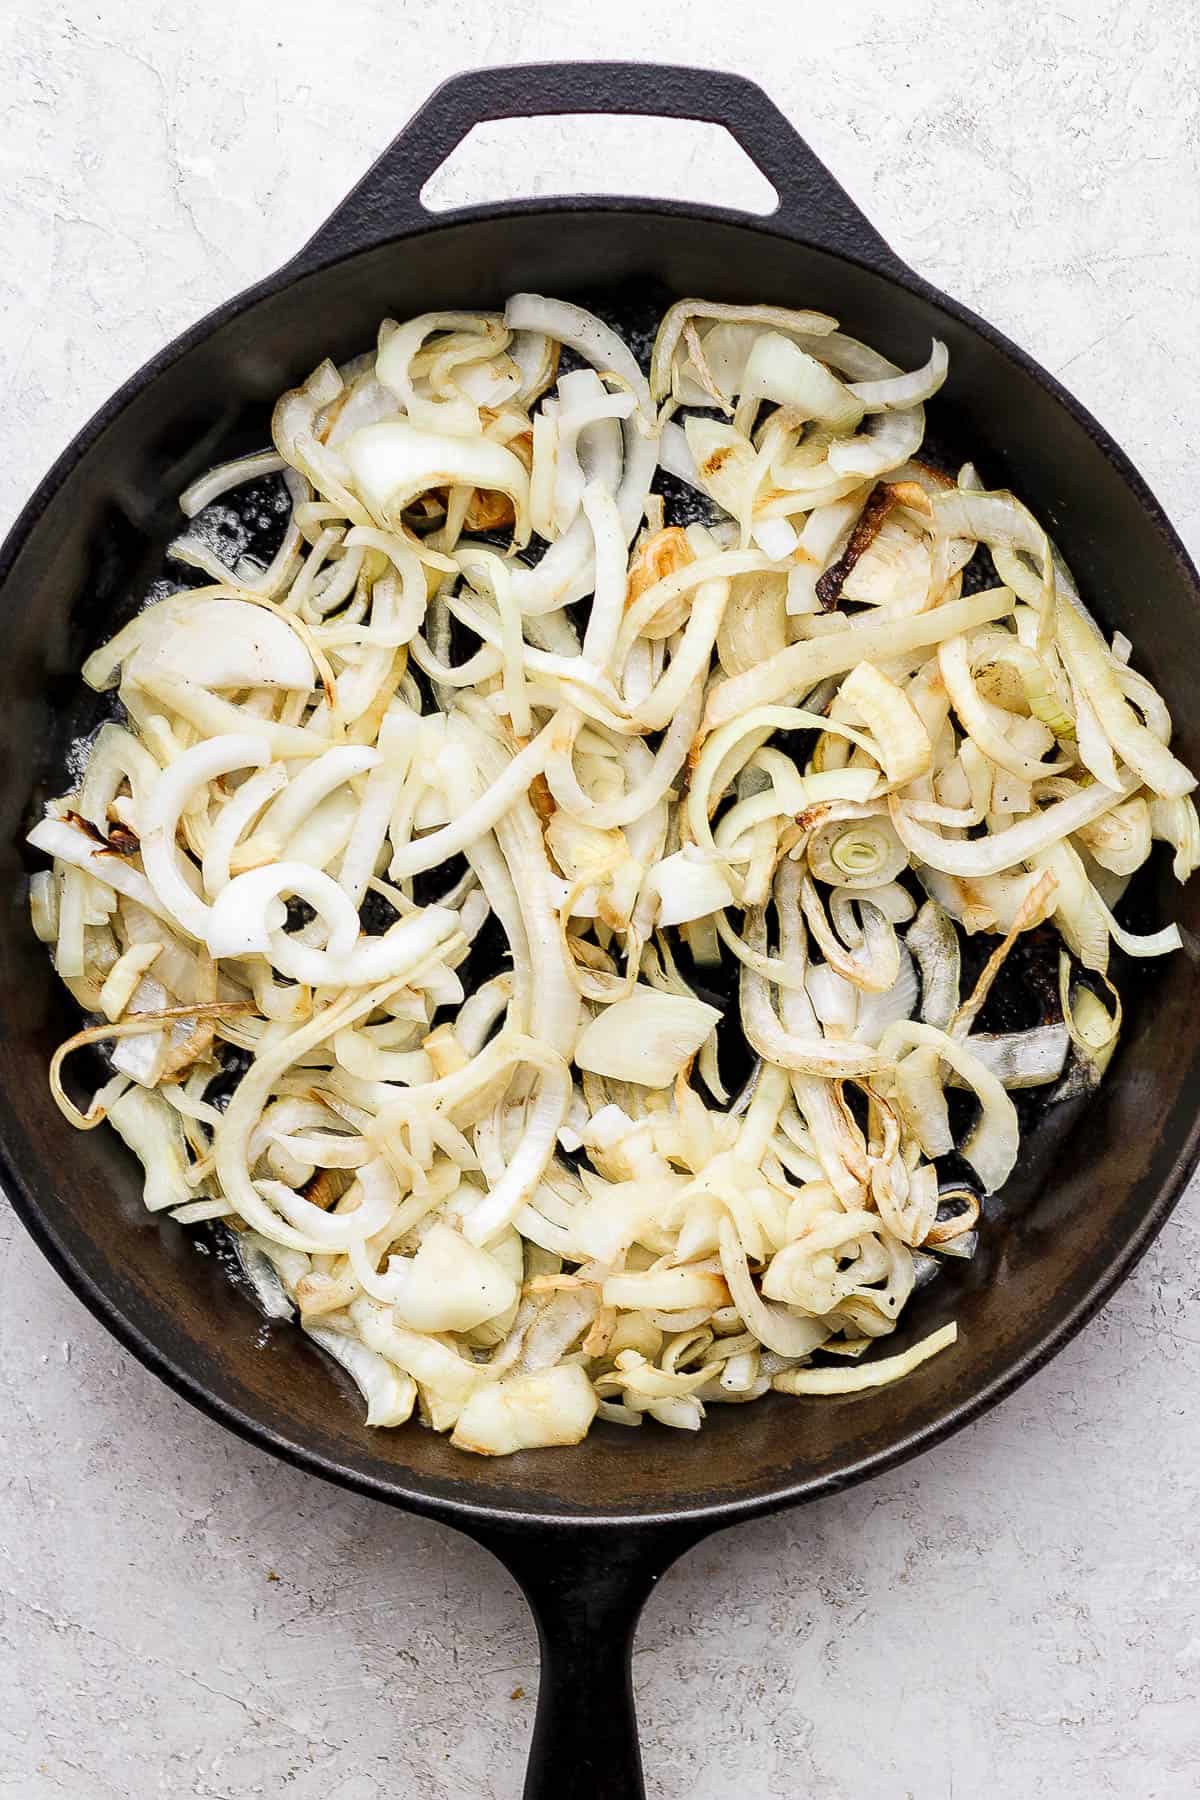 Smoked onions in a cast iron skillet with melted butter.